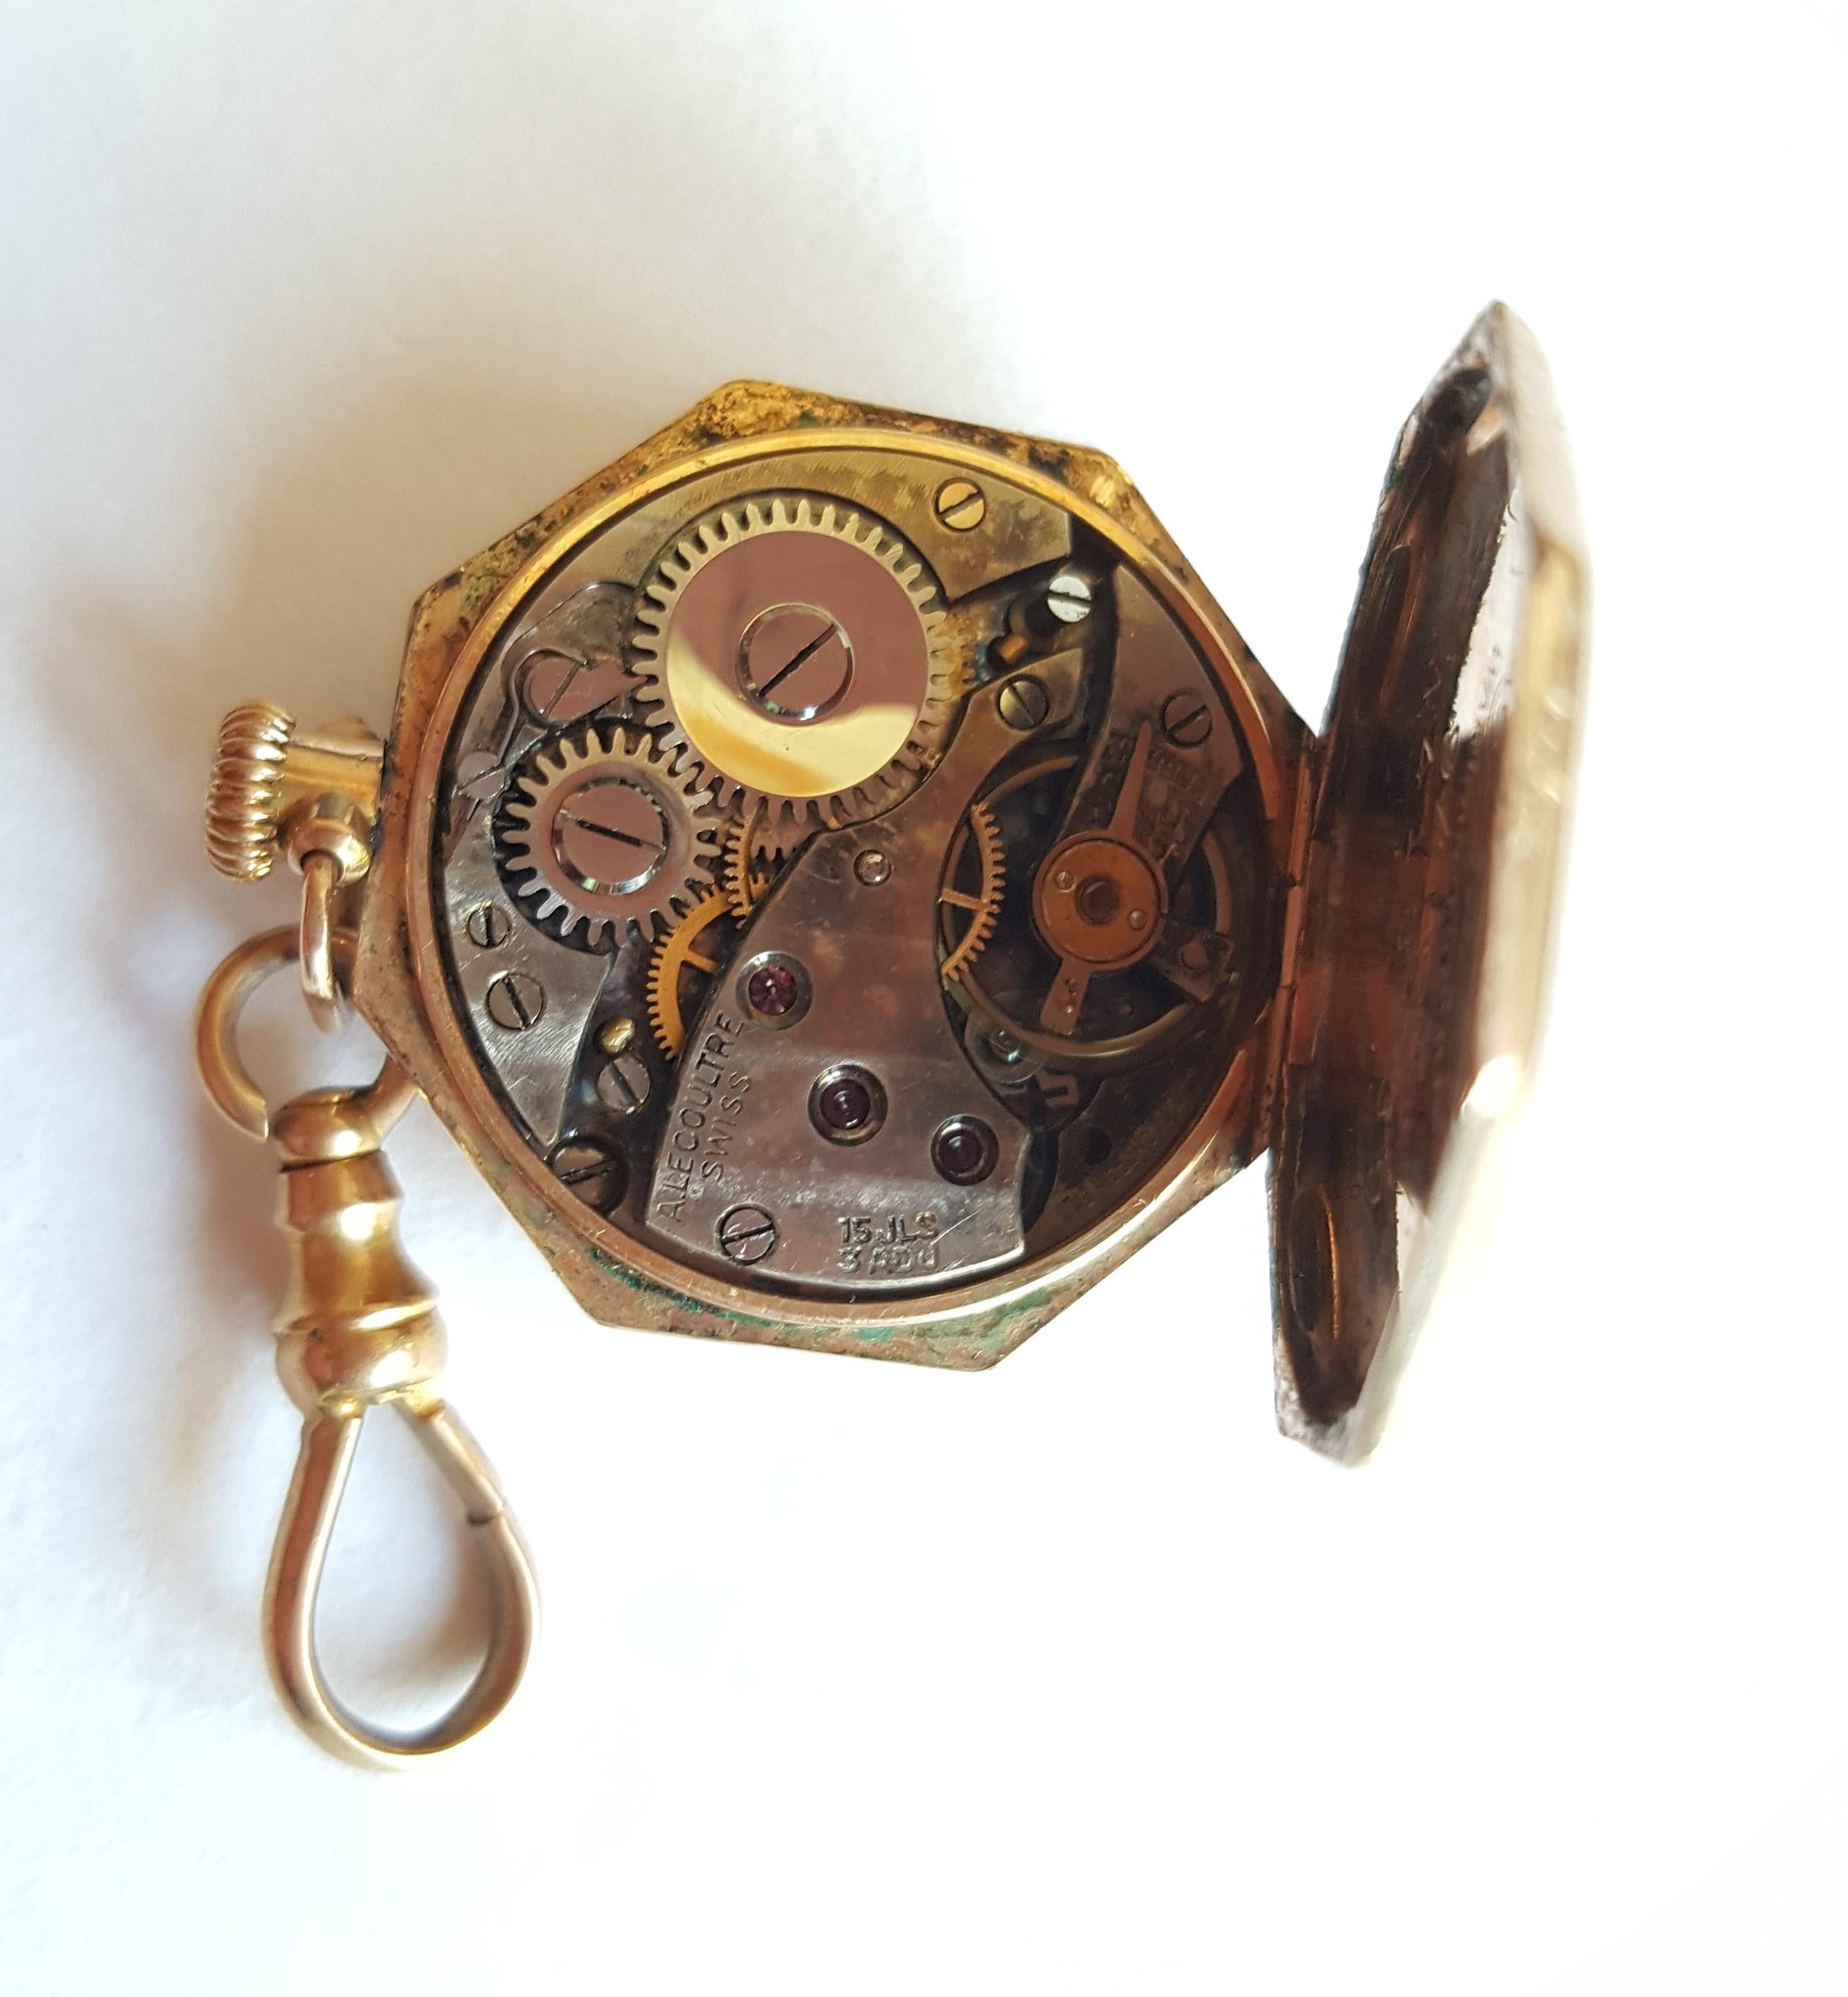 Vintage Gold Plated Mini Pocket / Pendant Watch, 1920', Octagon, Working, A. LeCoultre Swiss, 15 Jewel, 3 Adj, Gold Face, Black Numerals. The watch is 24 by 24 in diameter mm. Engraved Initials on the back. Good Condition.

This watch has not been